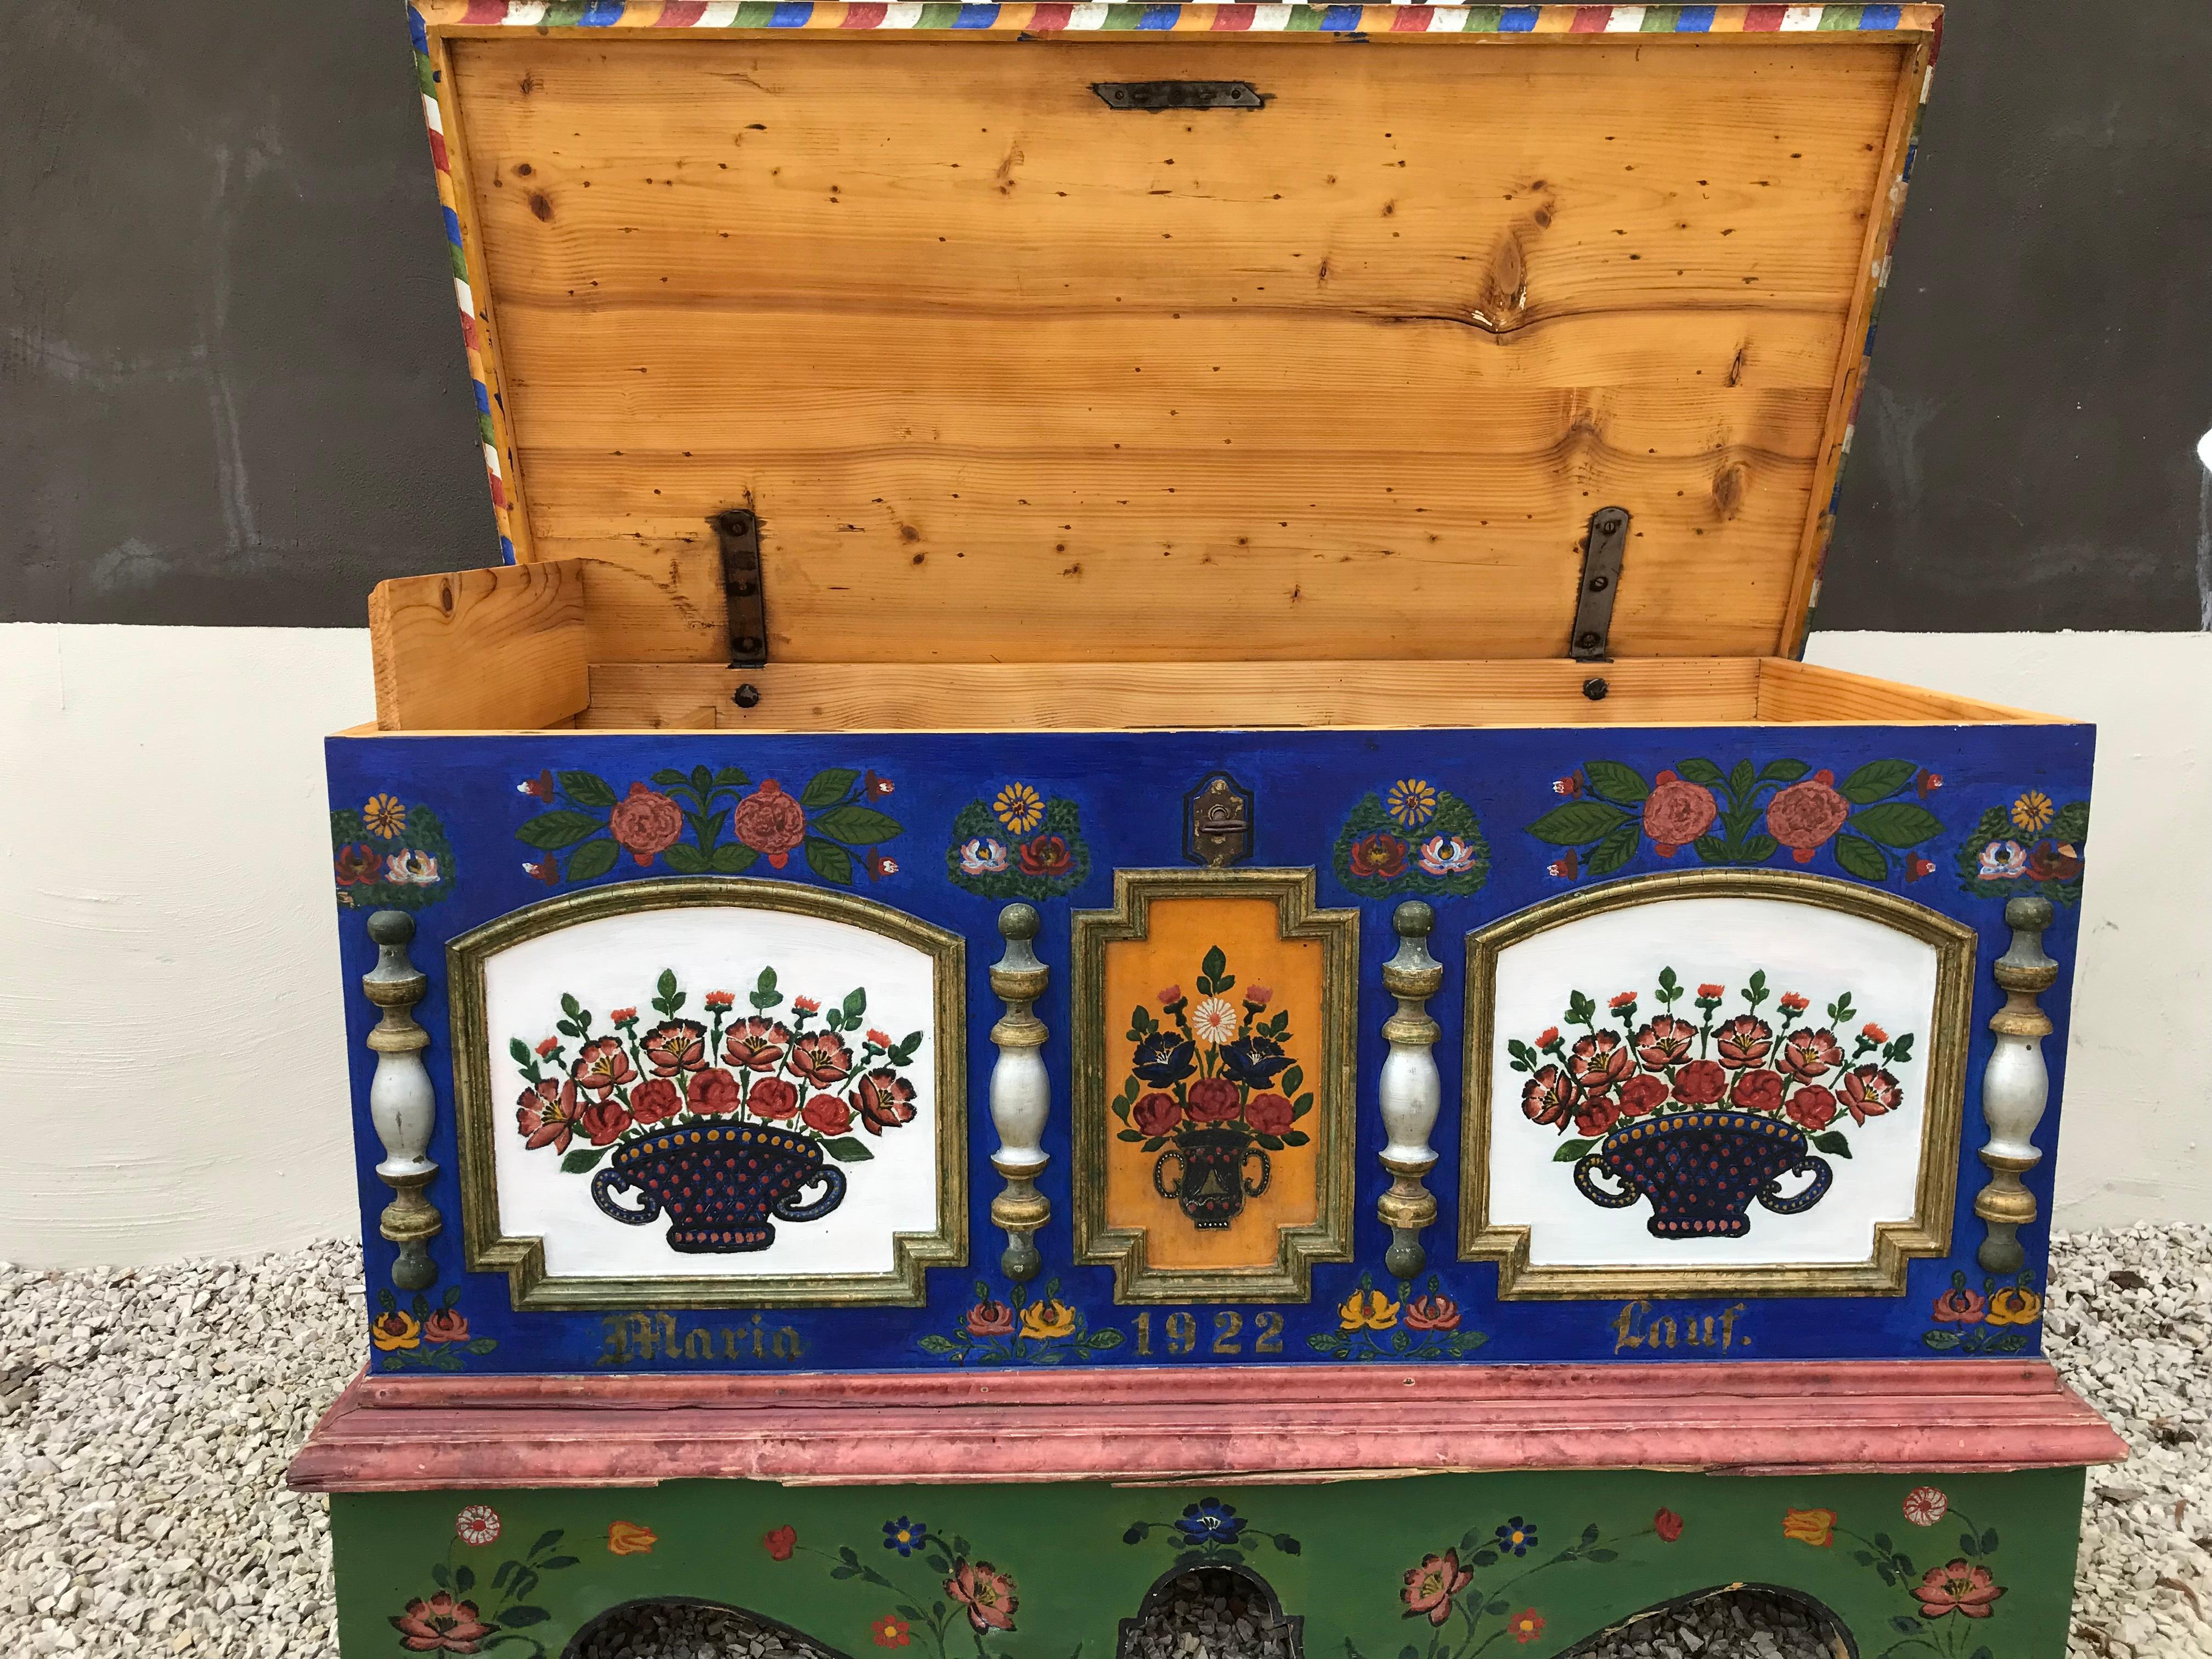 This painted chest comes from Slovakia,
year 1922.